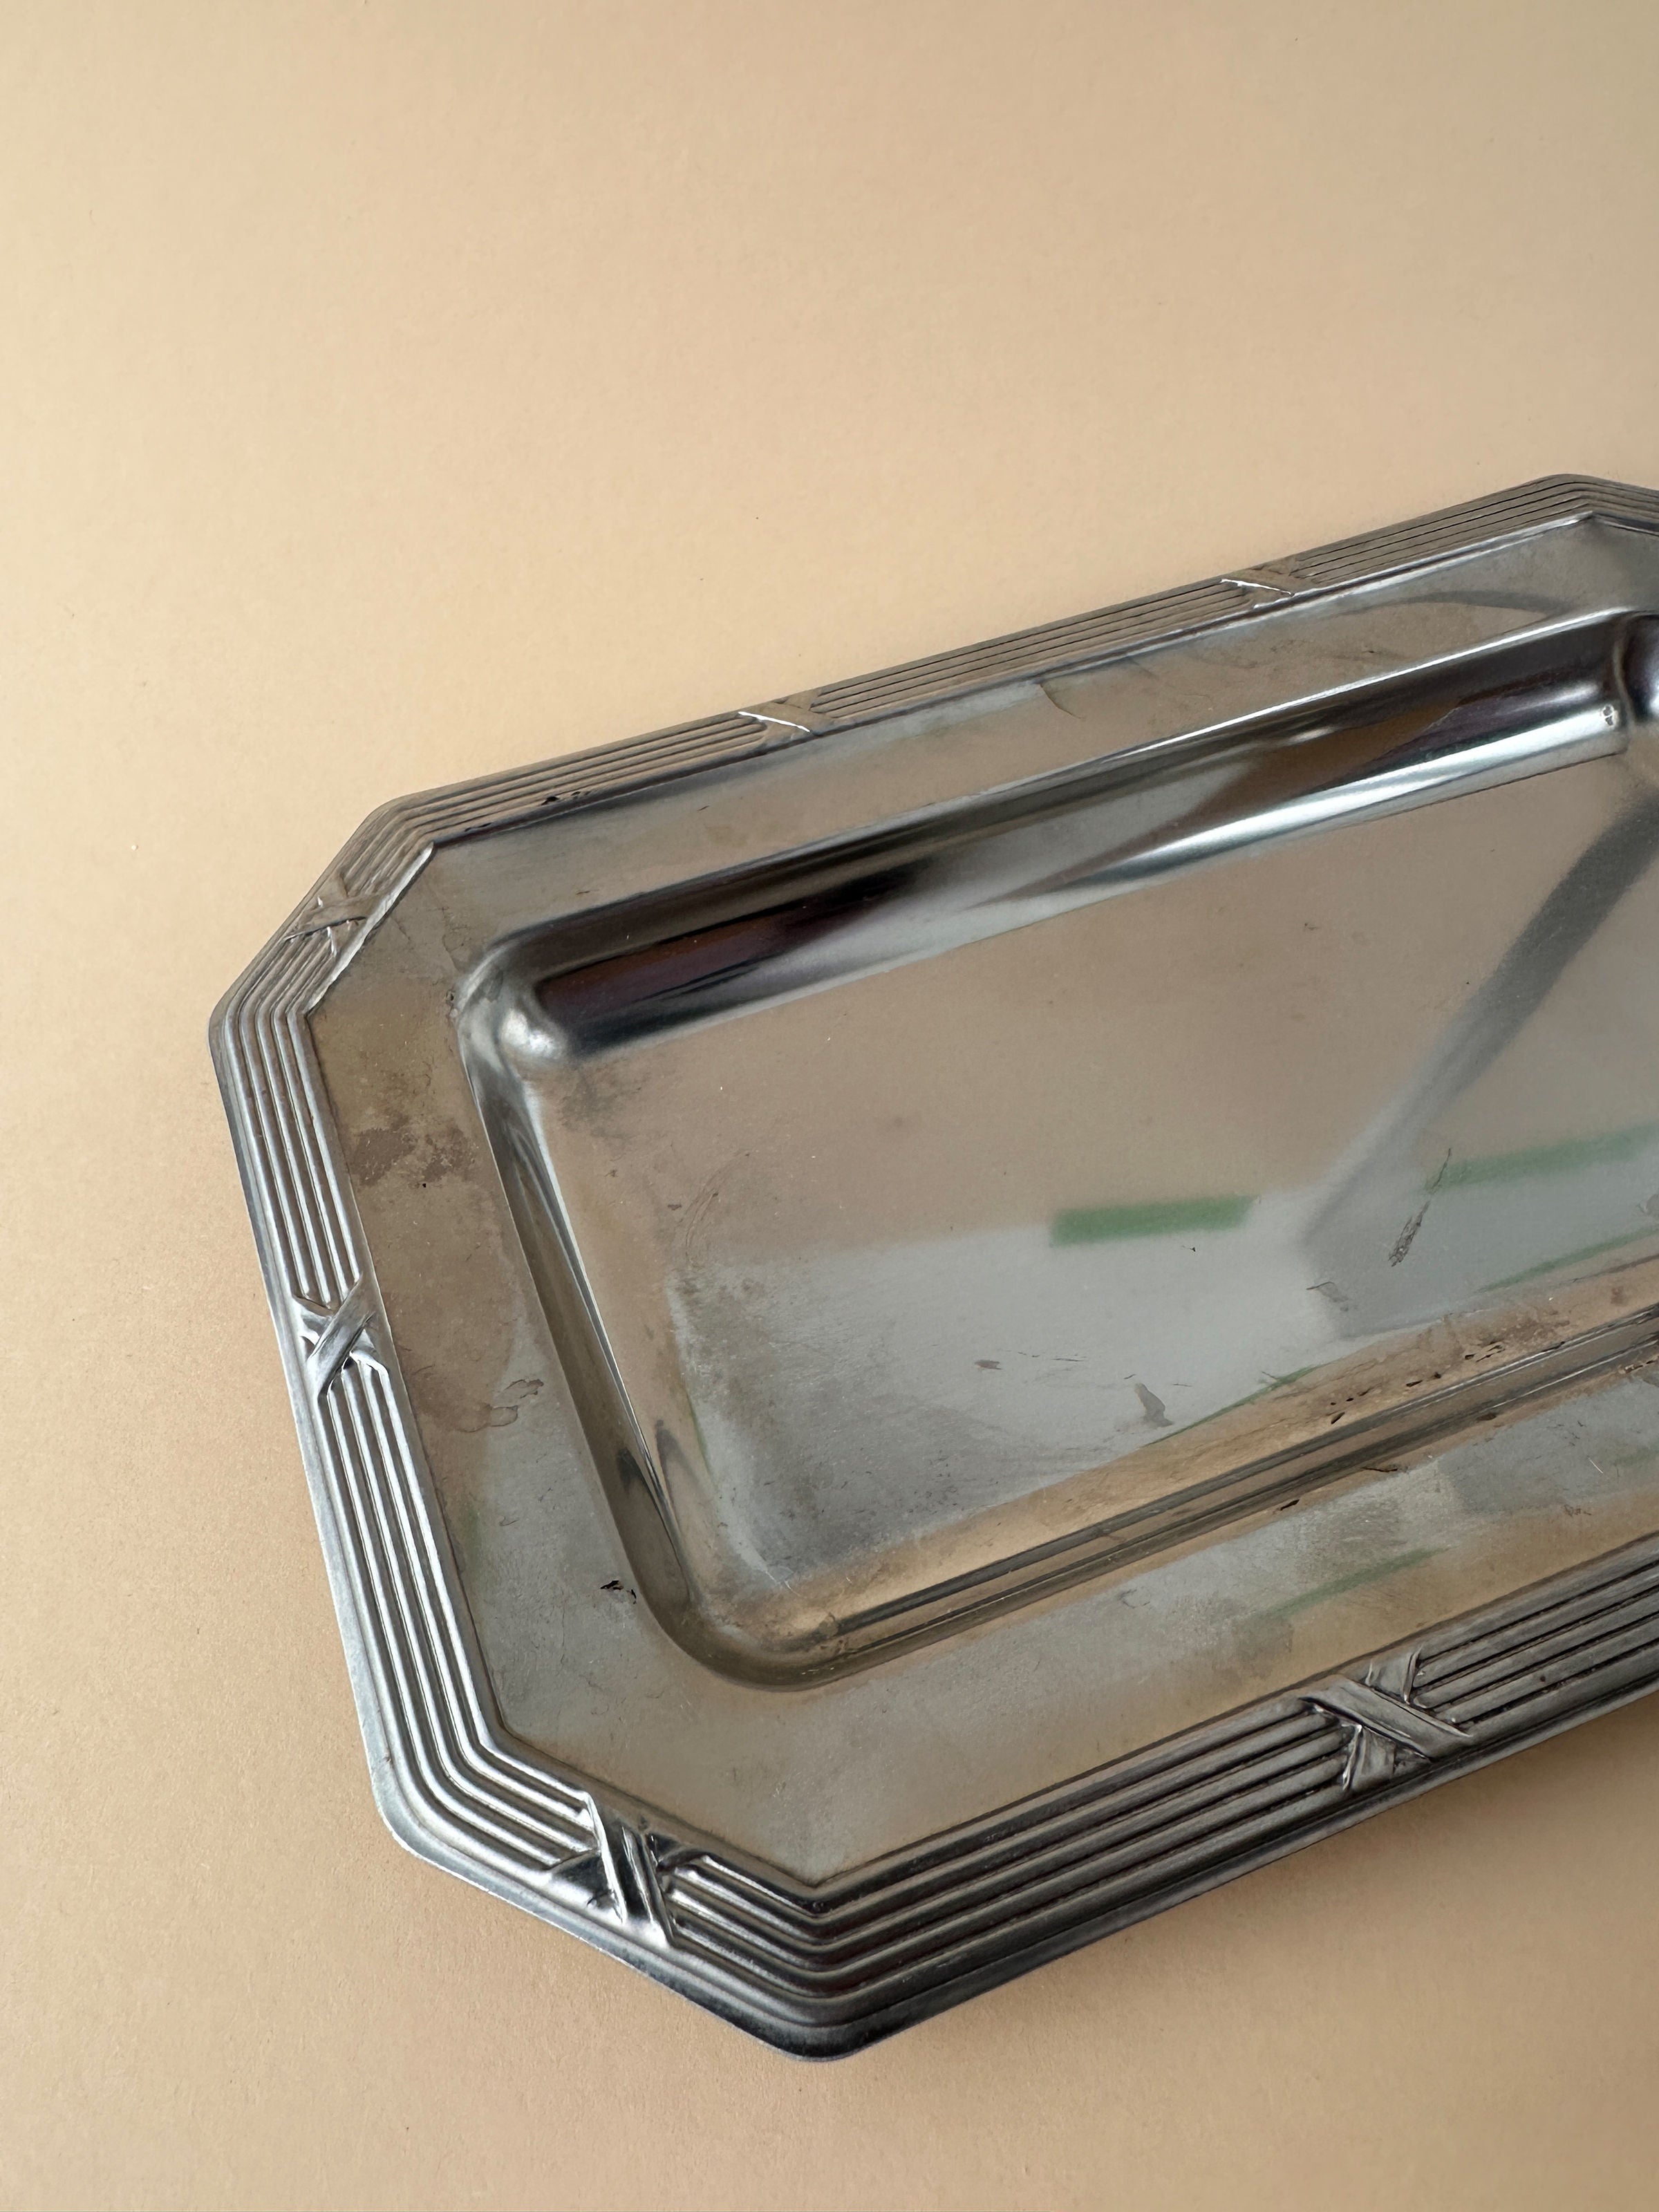 80s Metal Tray in Art Deco Revival Style